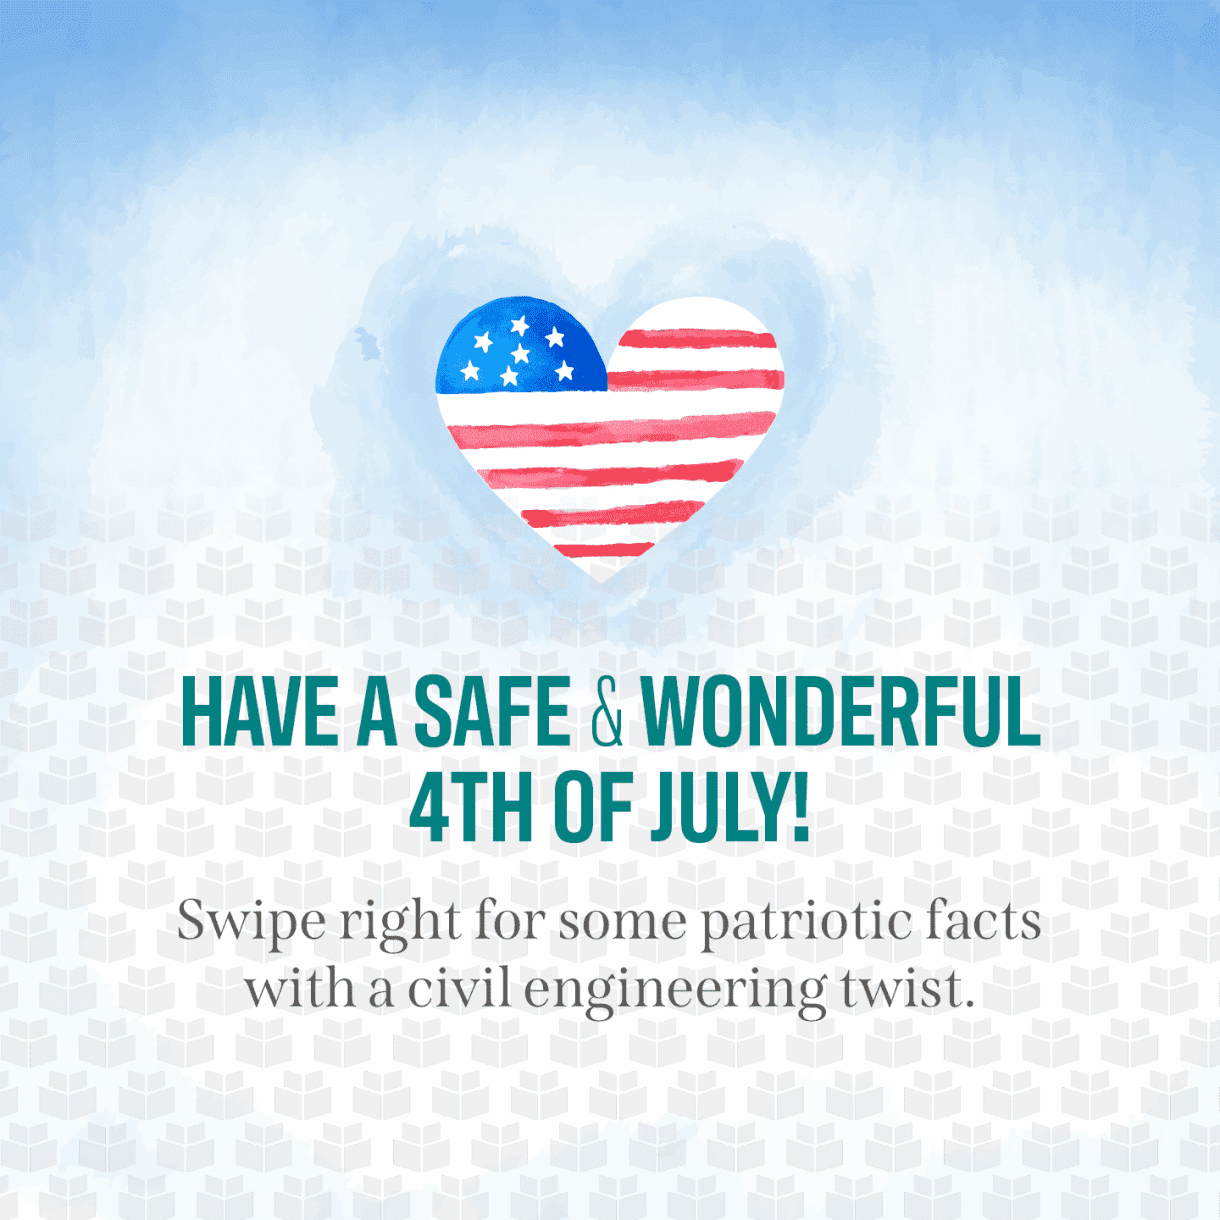 Happy 4th of July from WithersRavenel!